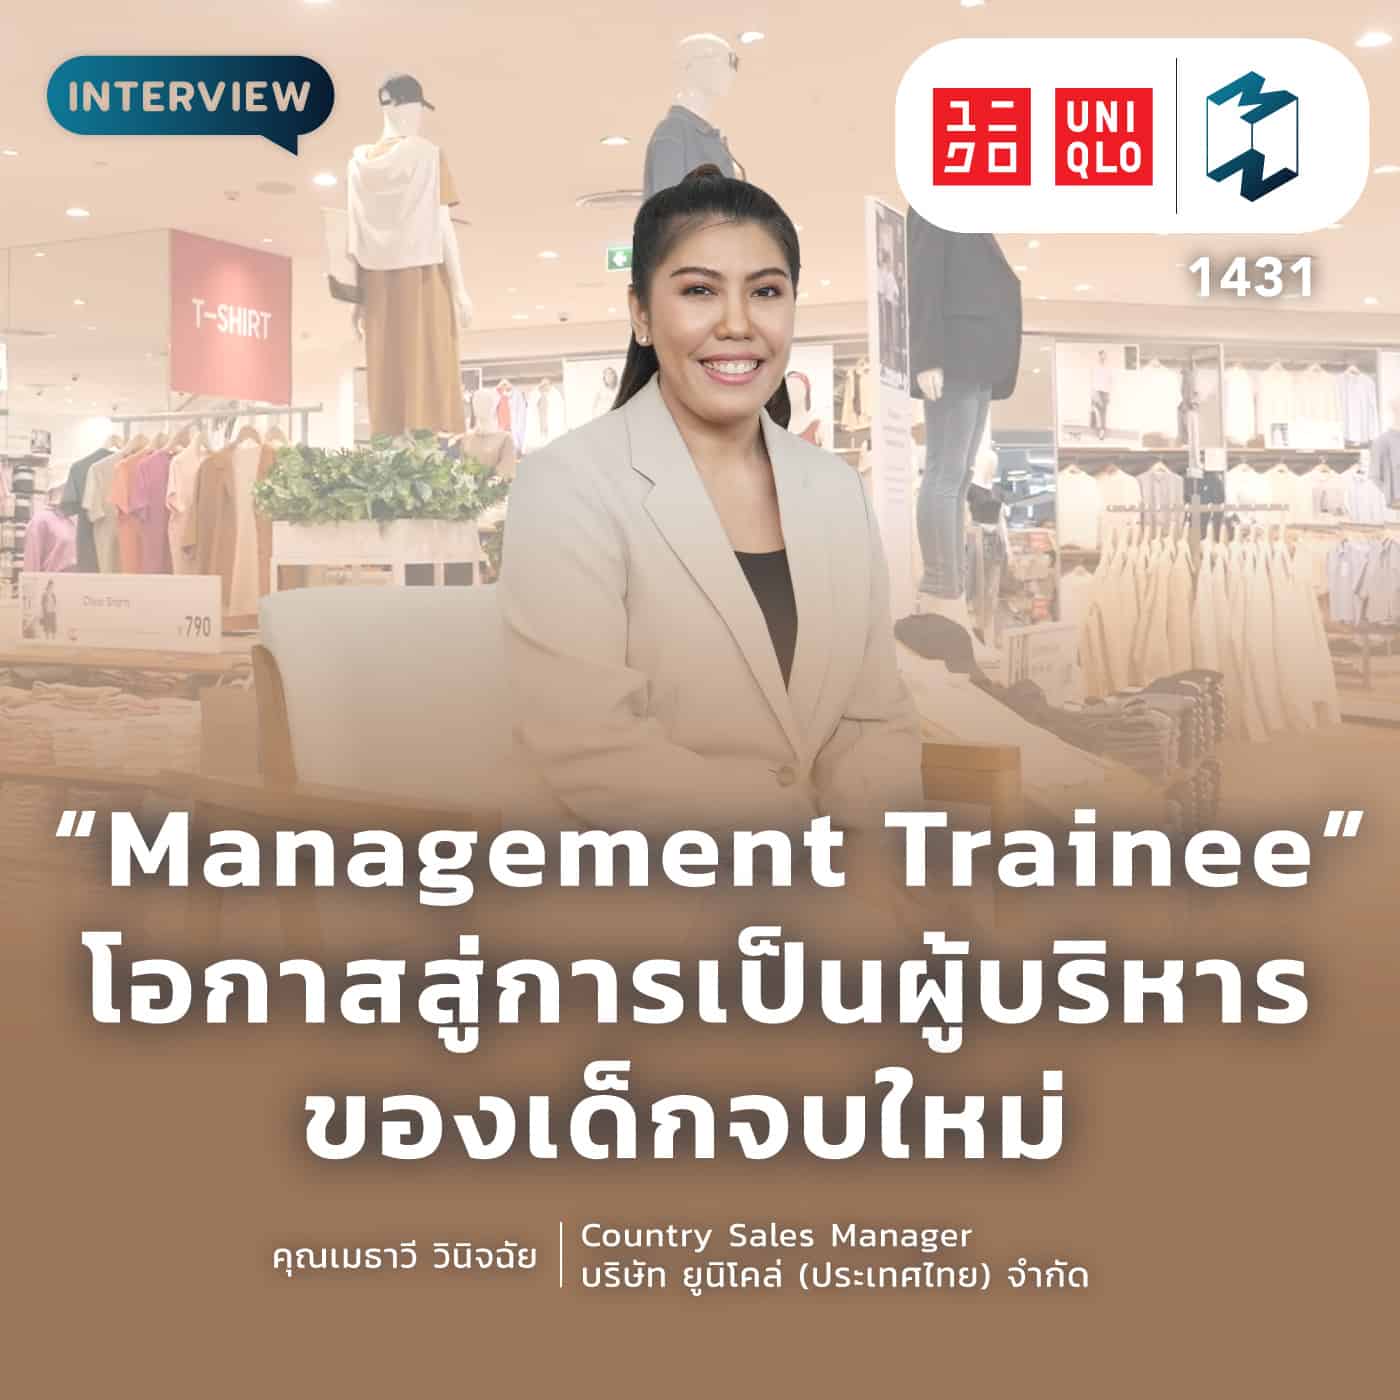 Центр развития карьеры ВШЭ  Uniqlo Manager Candidate Program 2017 If you  welcome new challenges have a drive for success embrace the  responsibility of leadership and aspire to become a part of